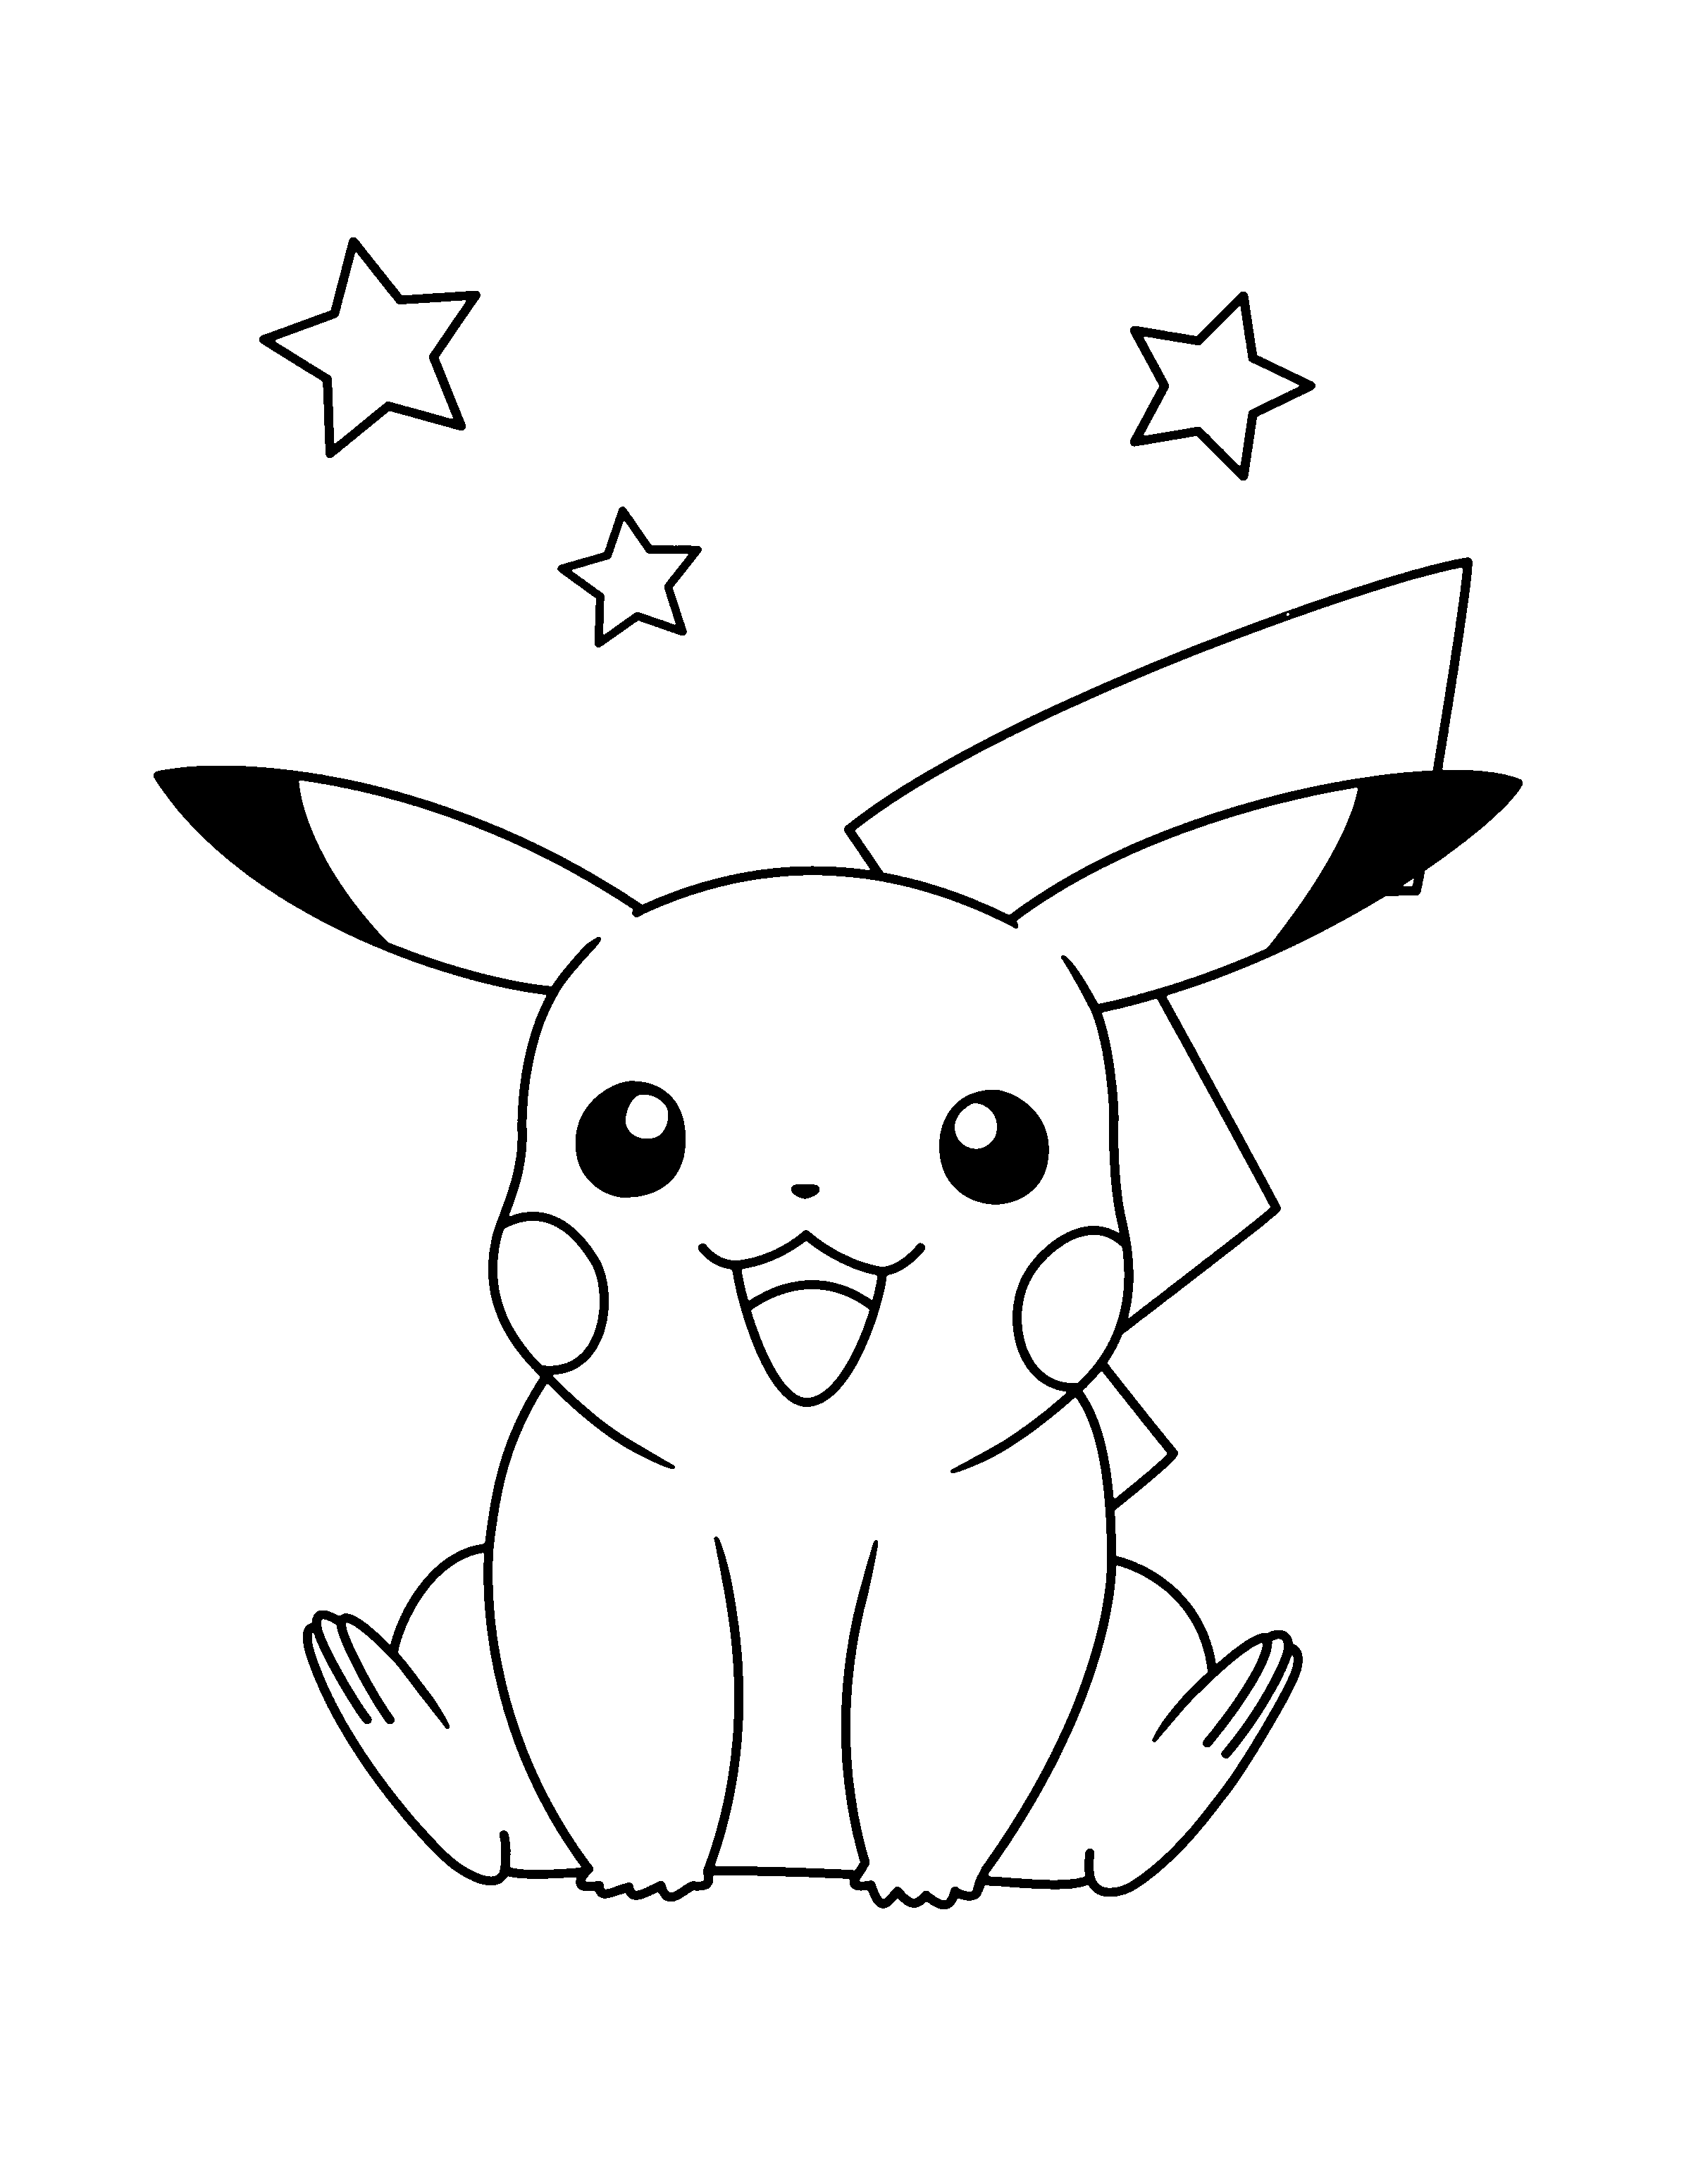 Pika Enters The Fight Pika Enters The Battle Pokemon coloring page